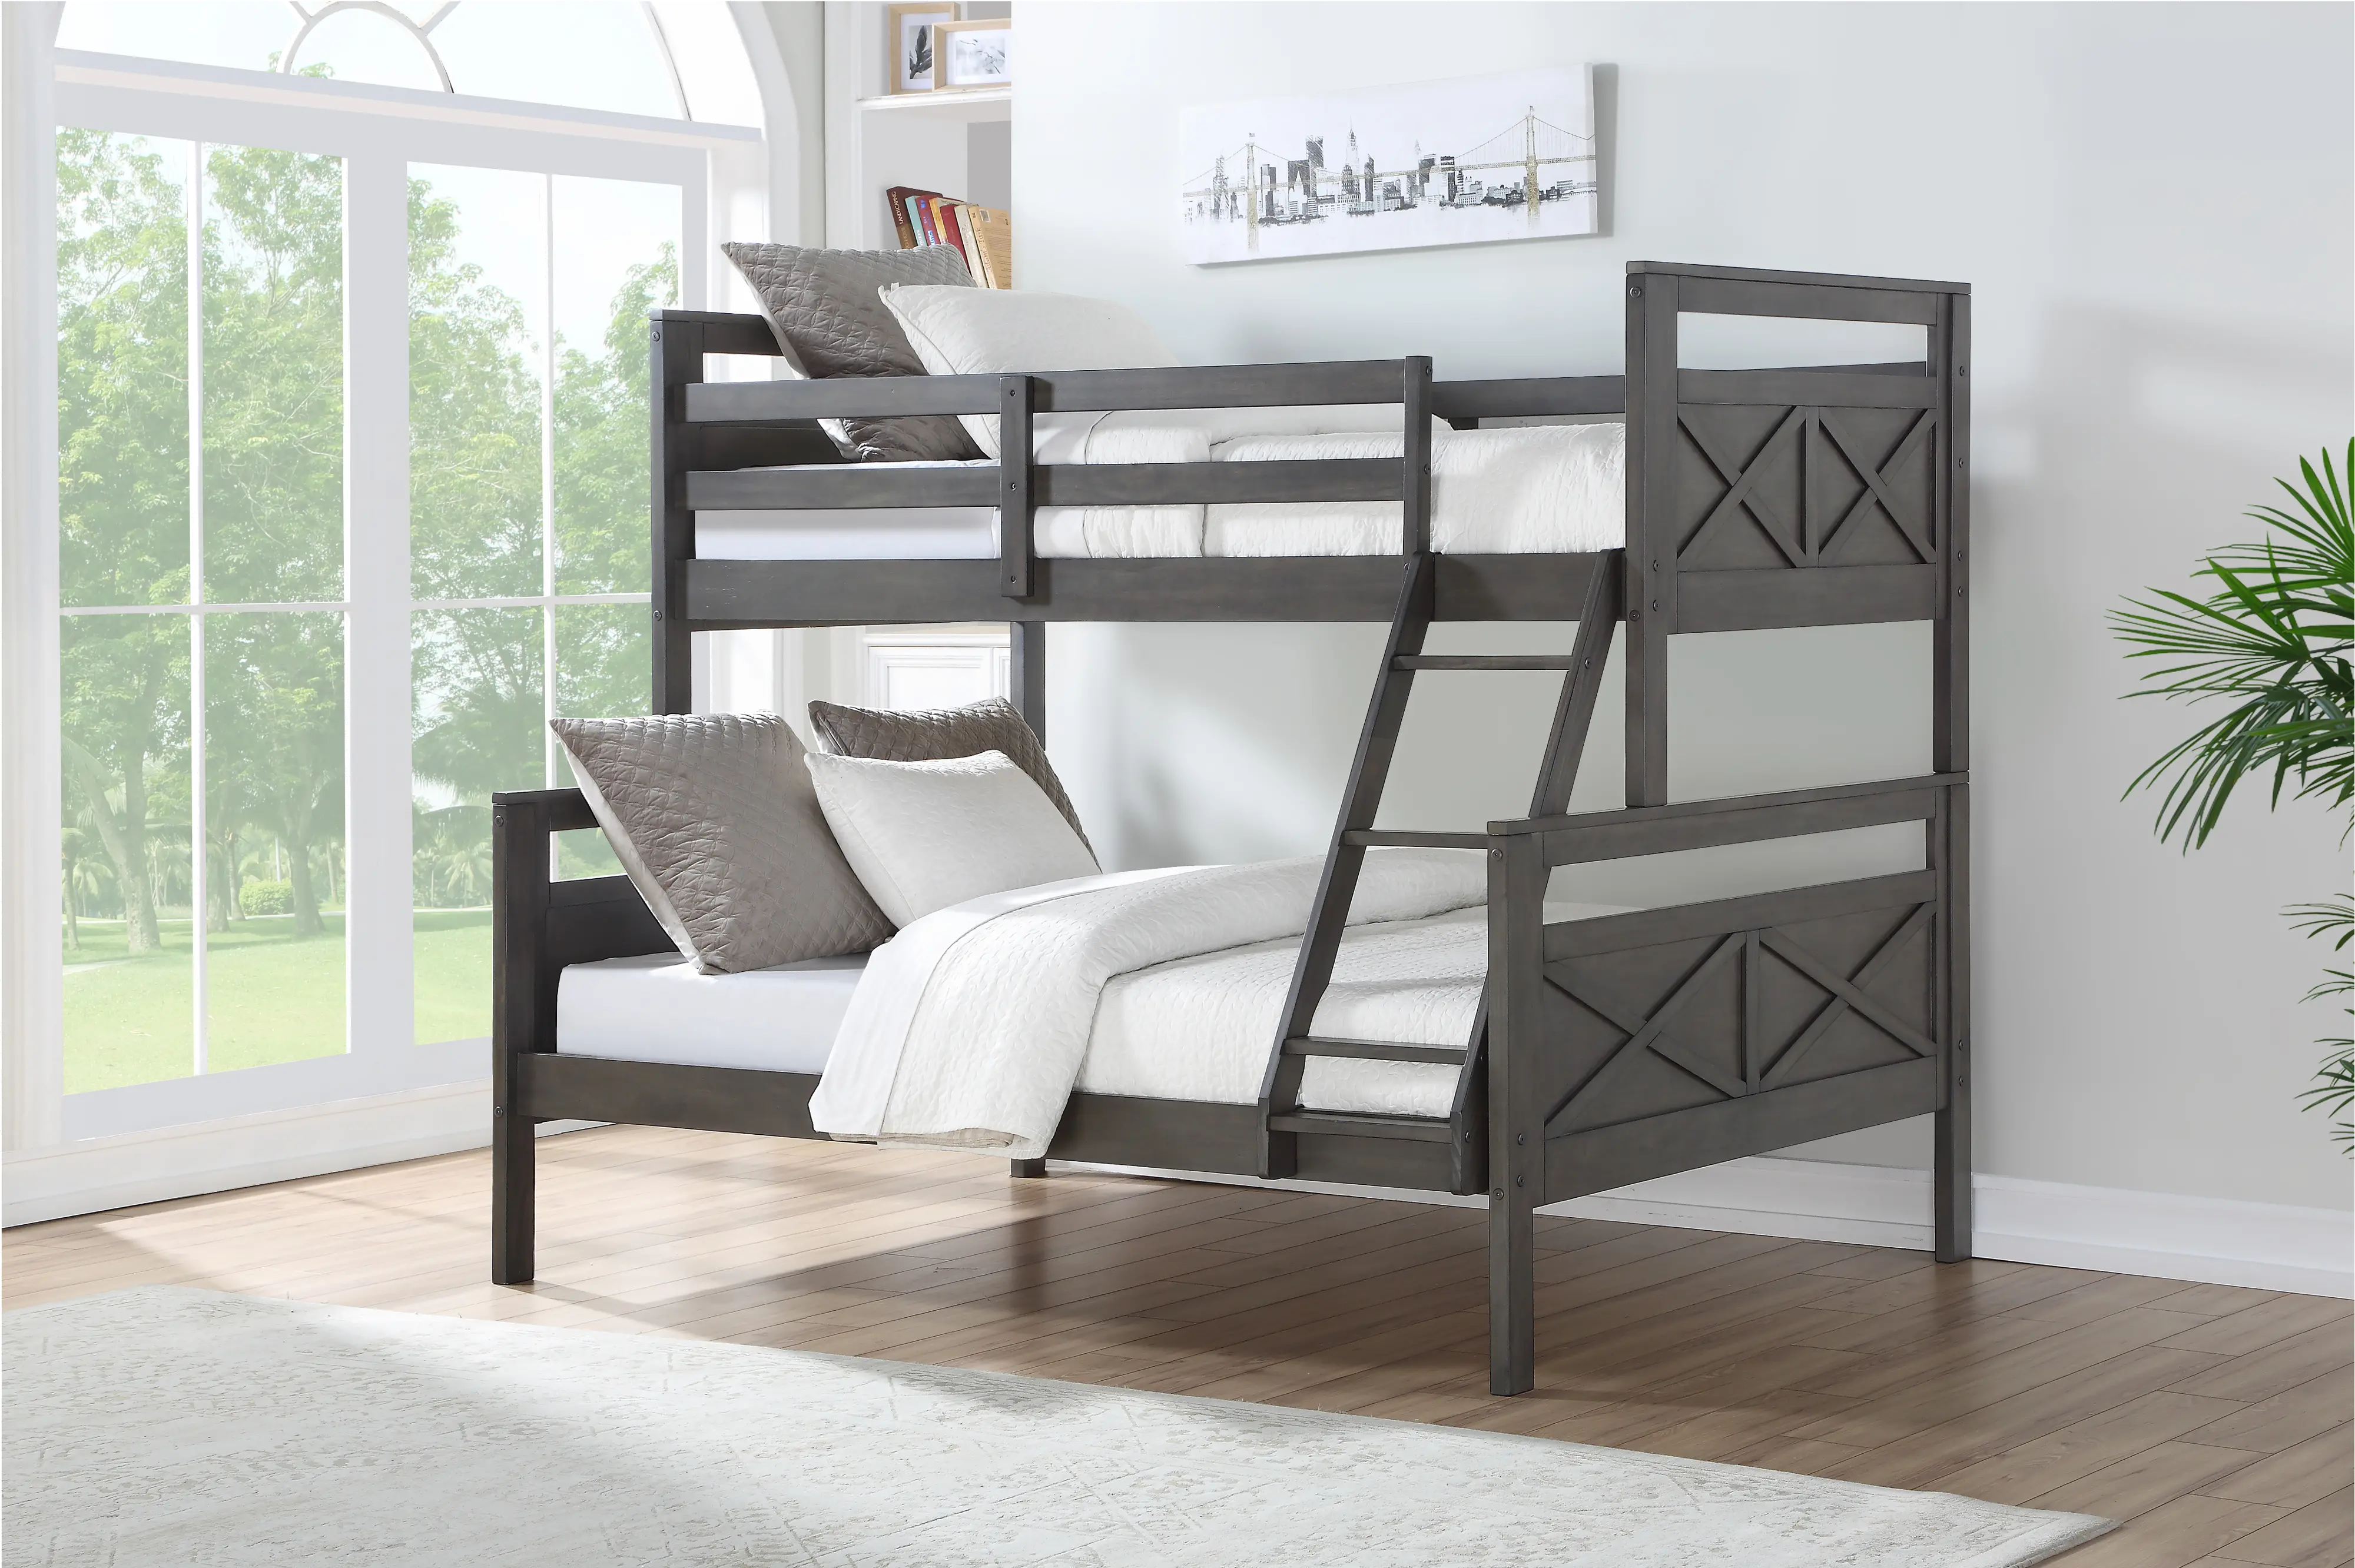 0518-TFRG Contemporary Rustic Gray Twin over Full Bunk Bed sku 0518-TFRG